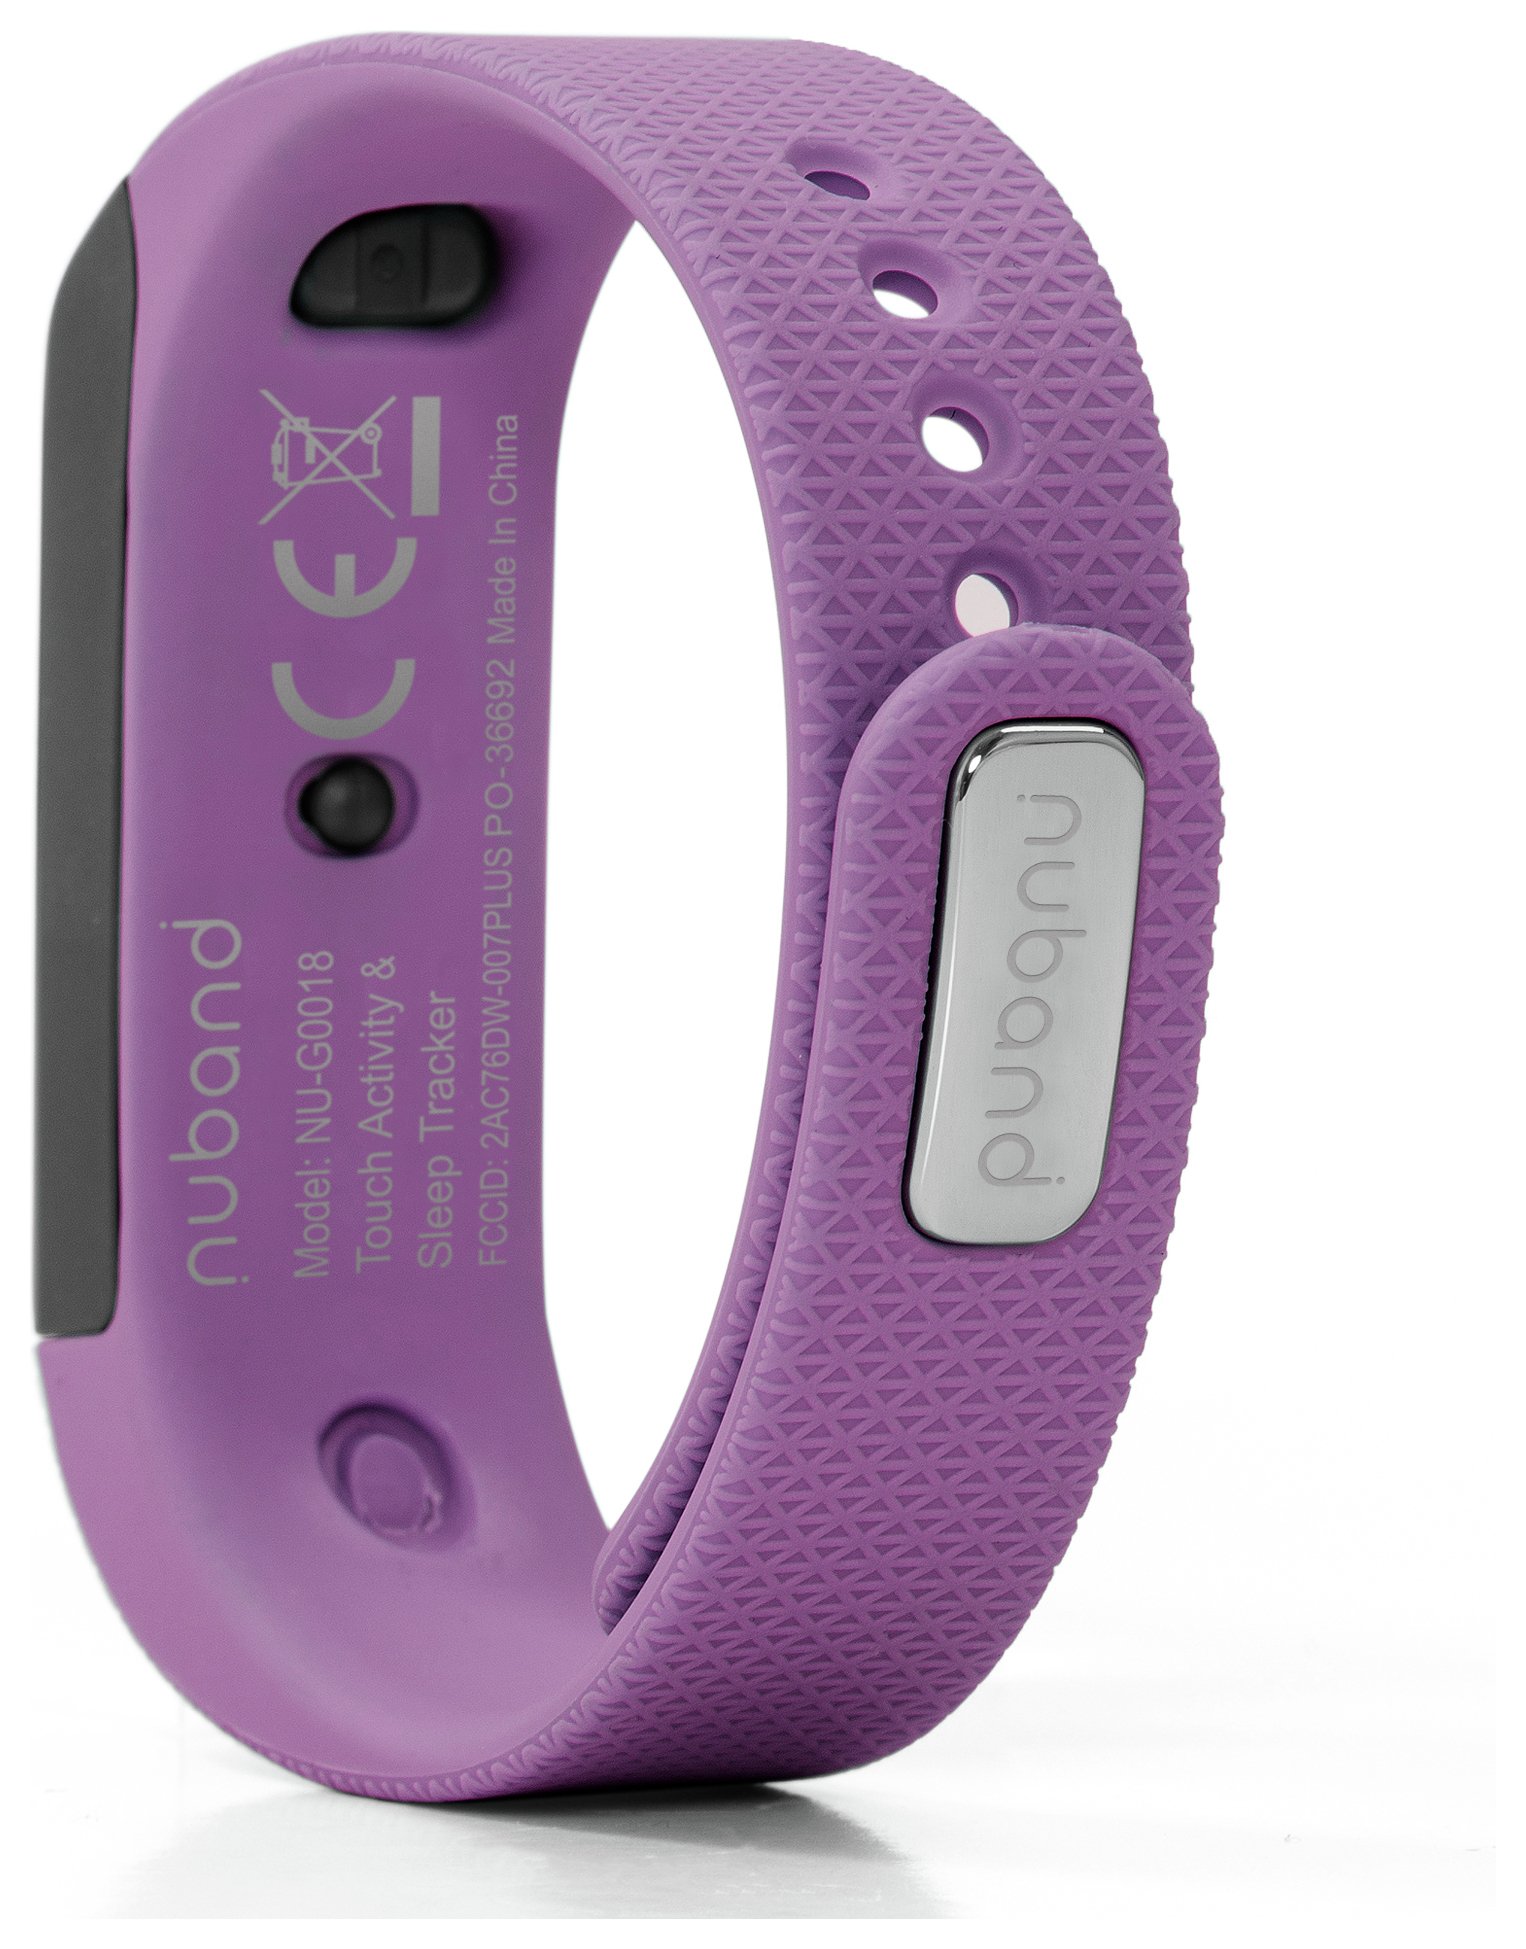 Nuband I Touch Fitness Tracker Reviews